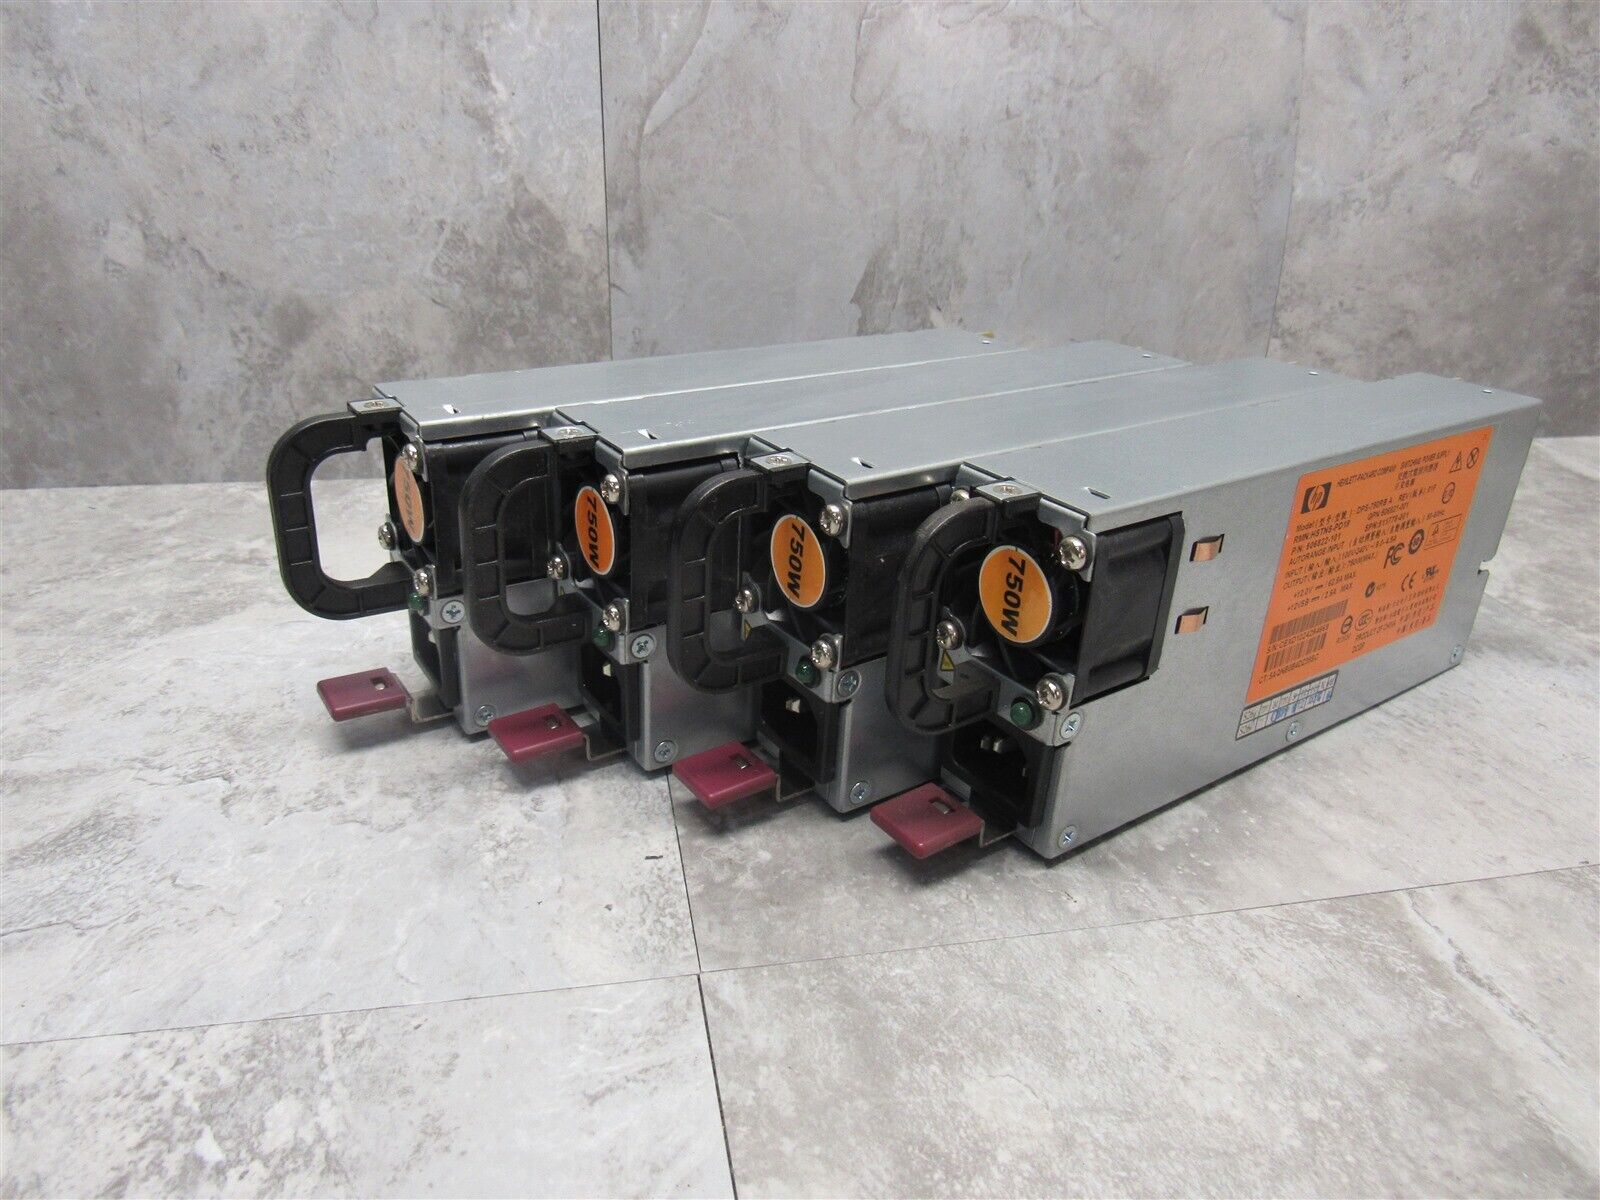 4 LOT - HP 750W PSU Power Supply HSTNS-PD18 506800-101 506821-001 511778-001 HP 506800-101 506821-001 511778-001